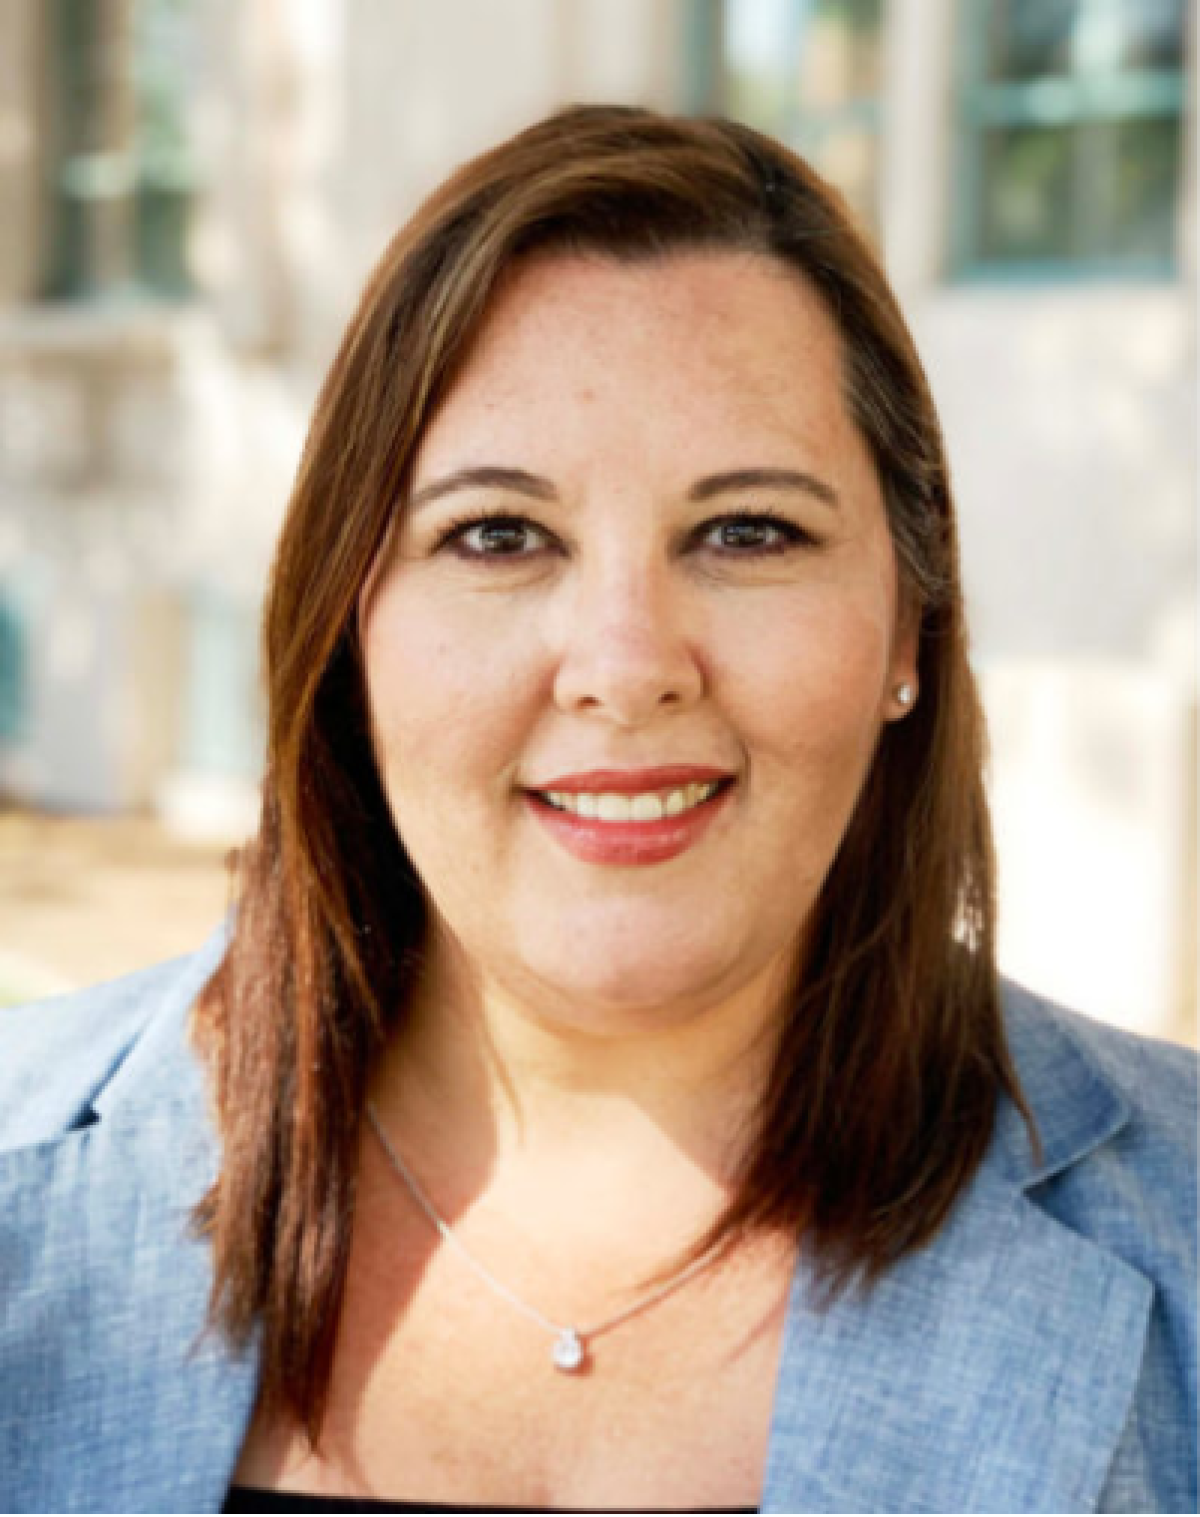 Natalia Bravo was named Chief of Staff for Chief Administrative Officer Helen Robbins-Meyer.